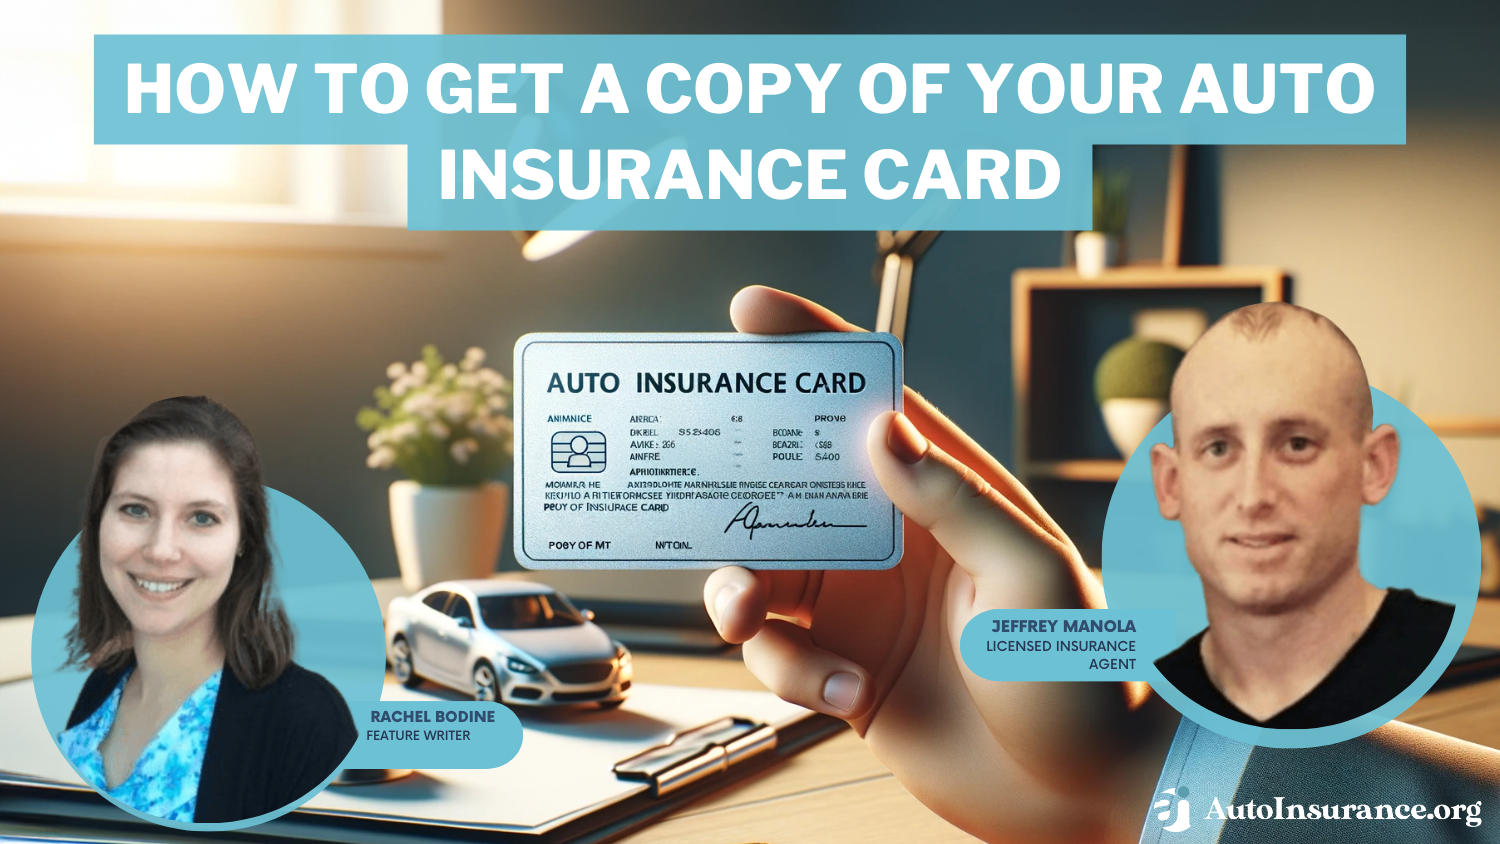 How To Get A Copy Of Your Auto Insurance Card